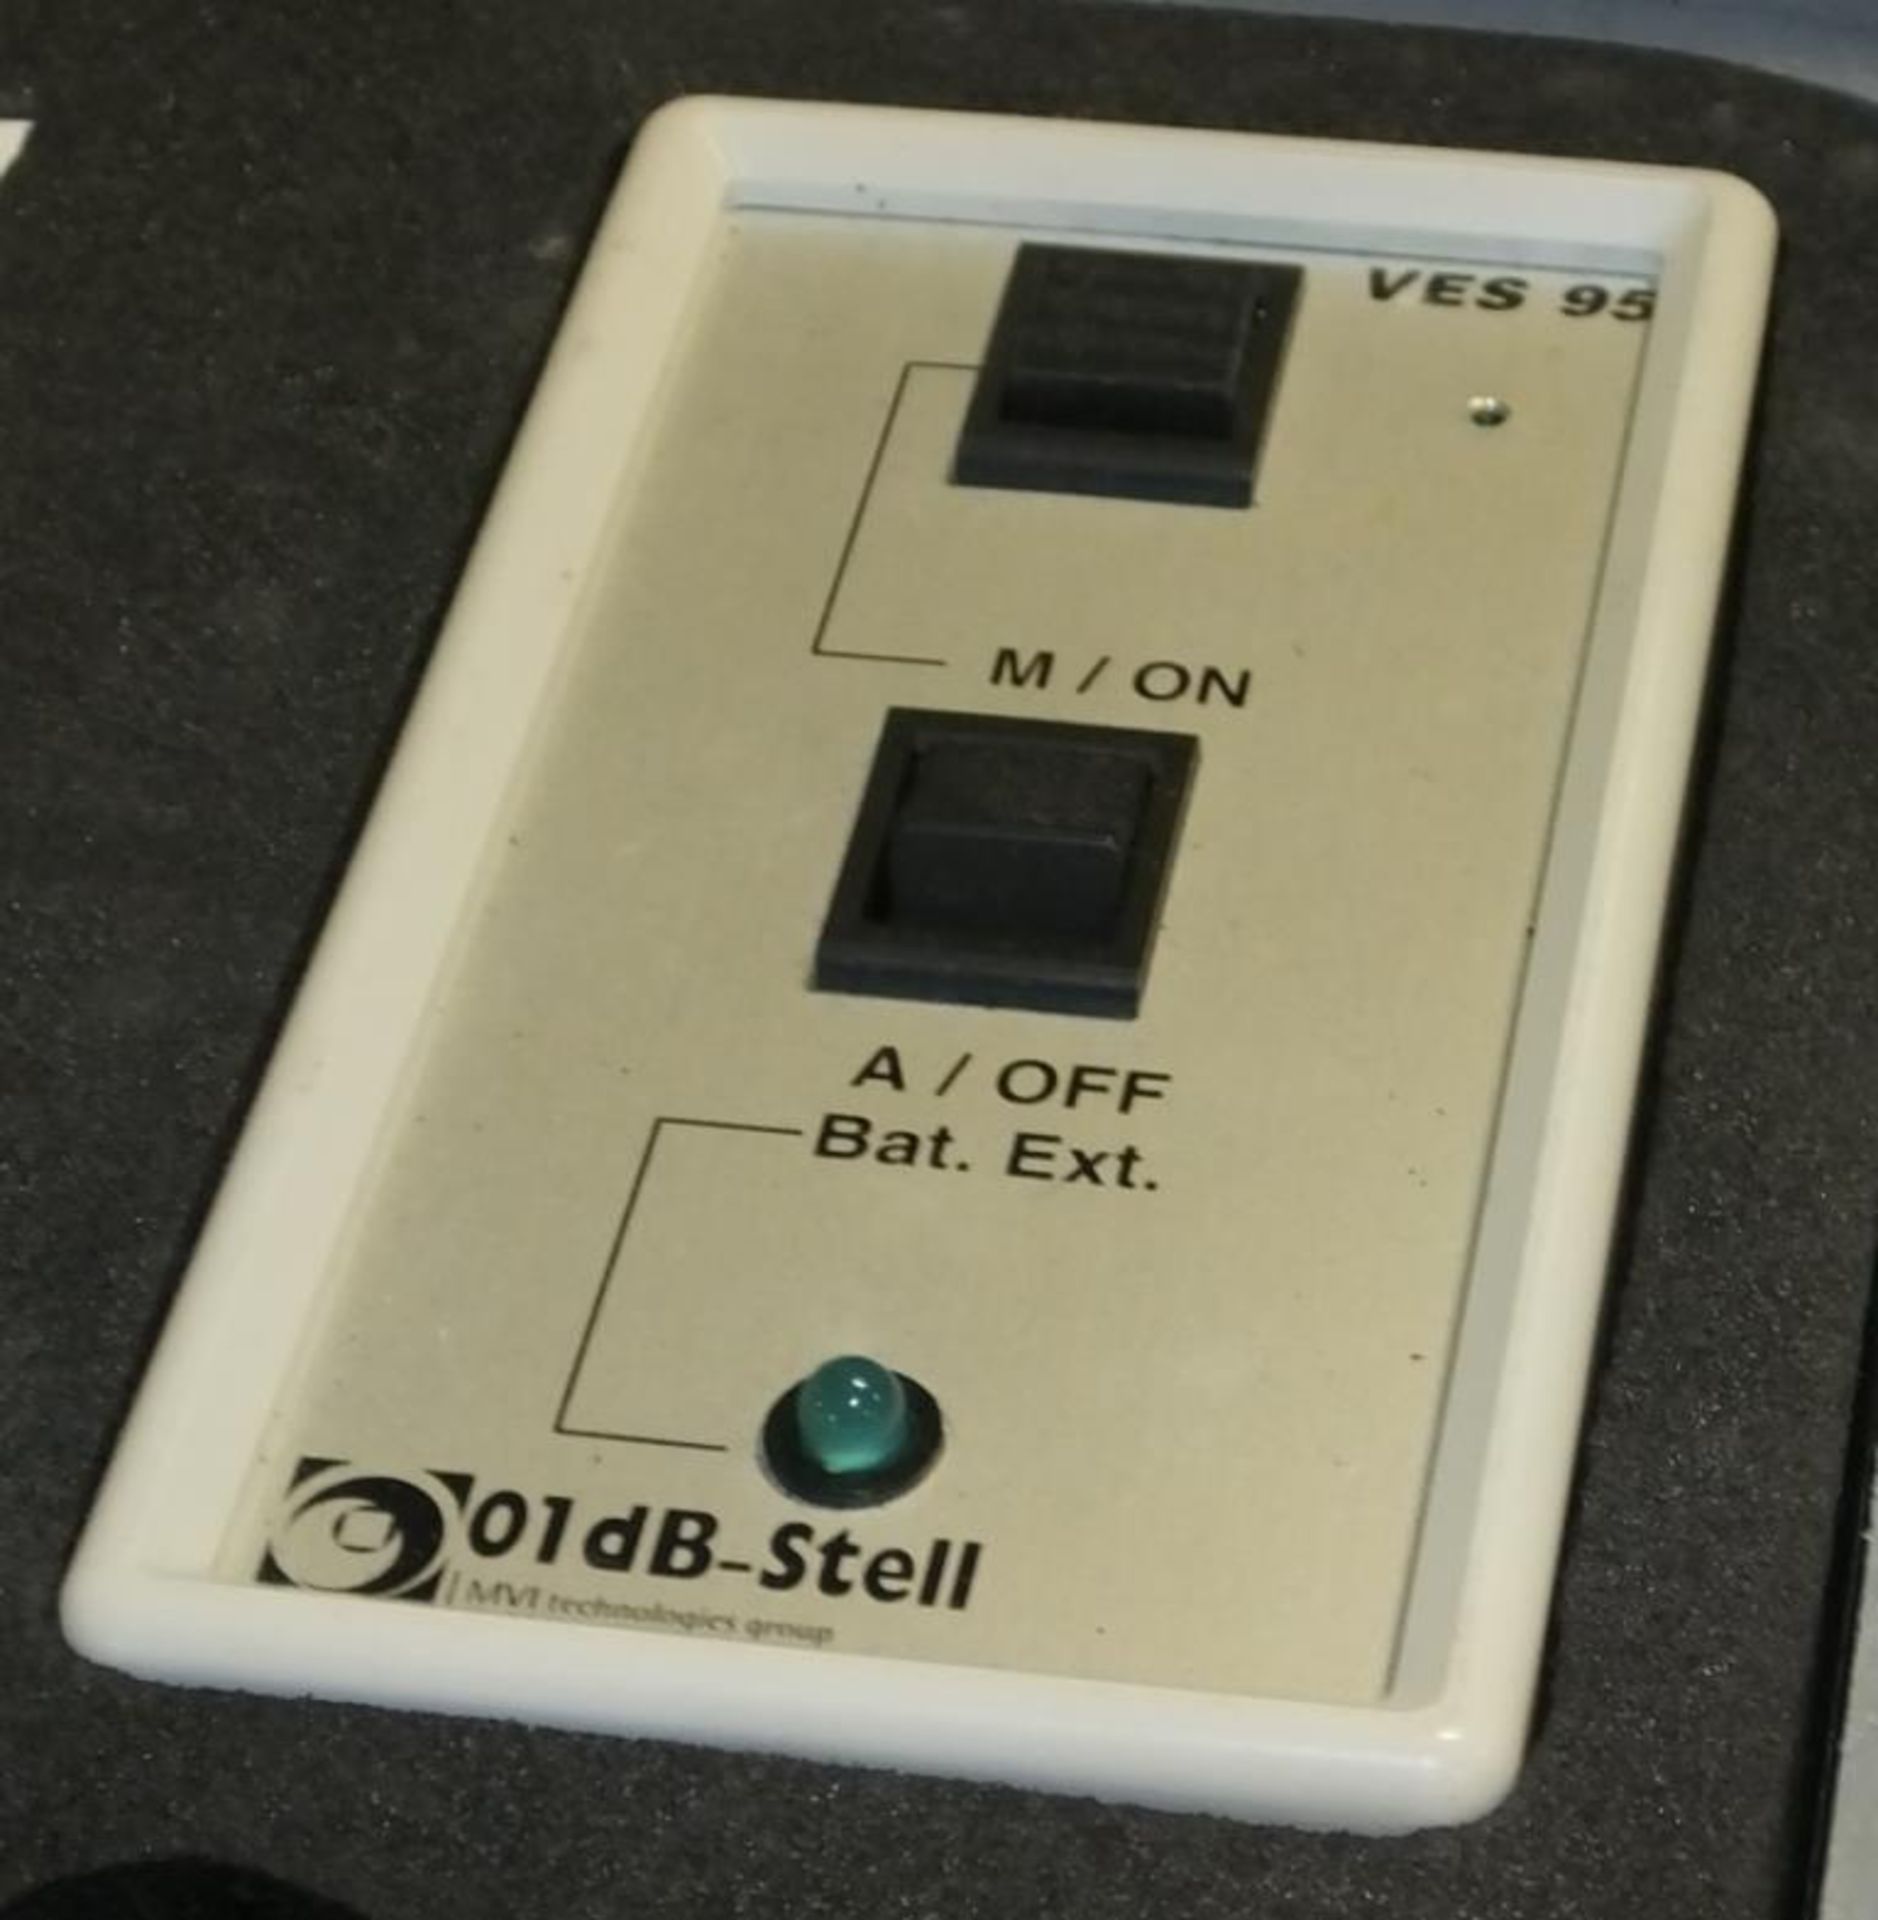 01 DB Stell sound level meter in case - Image 3 of 3